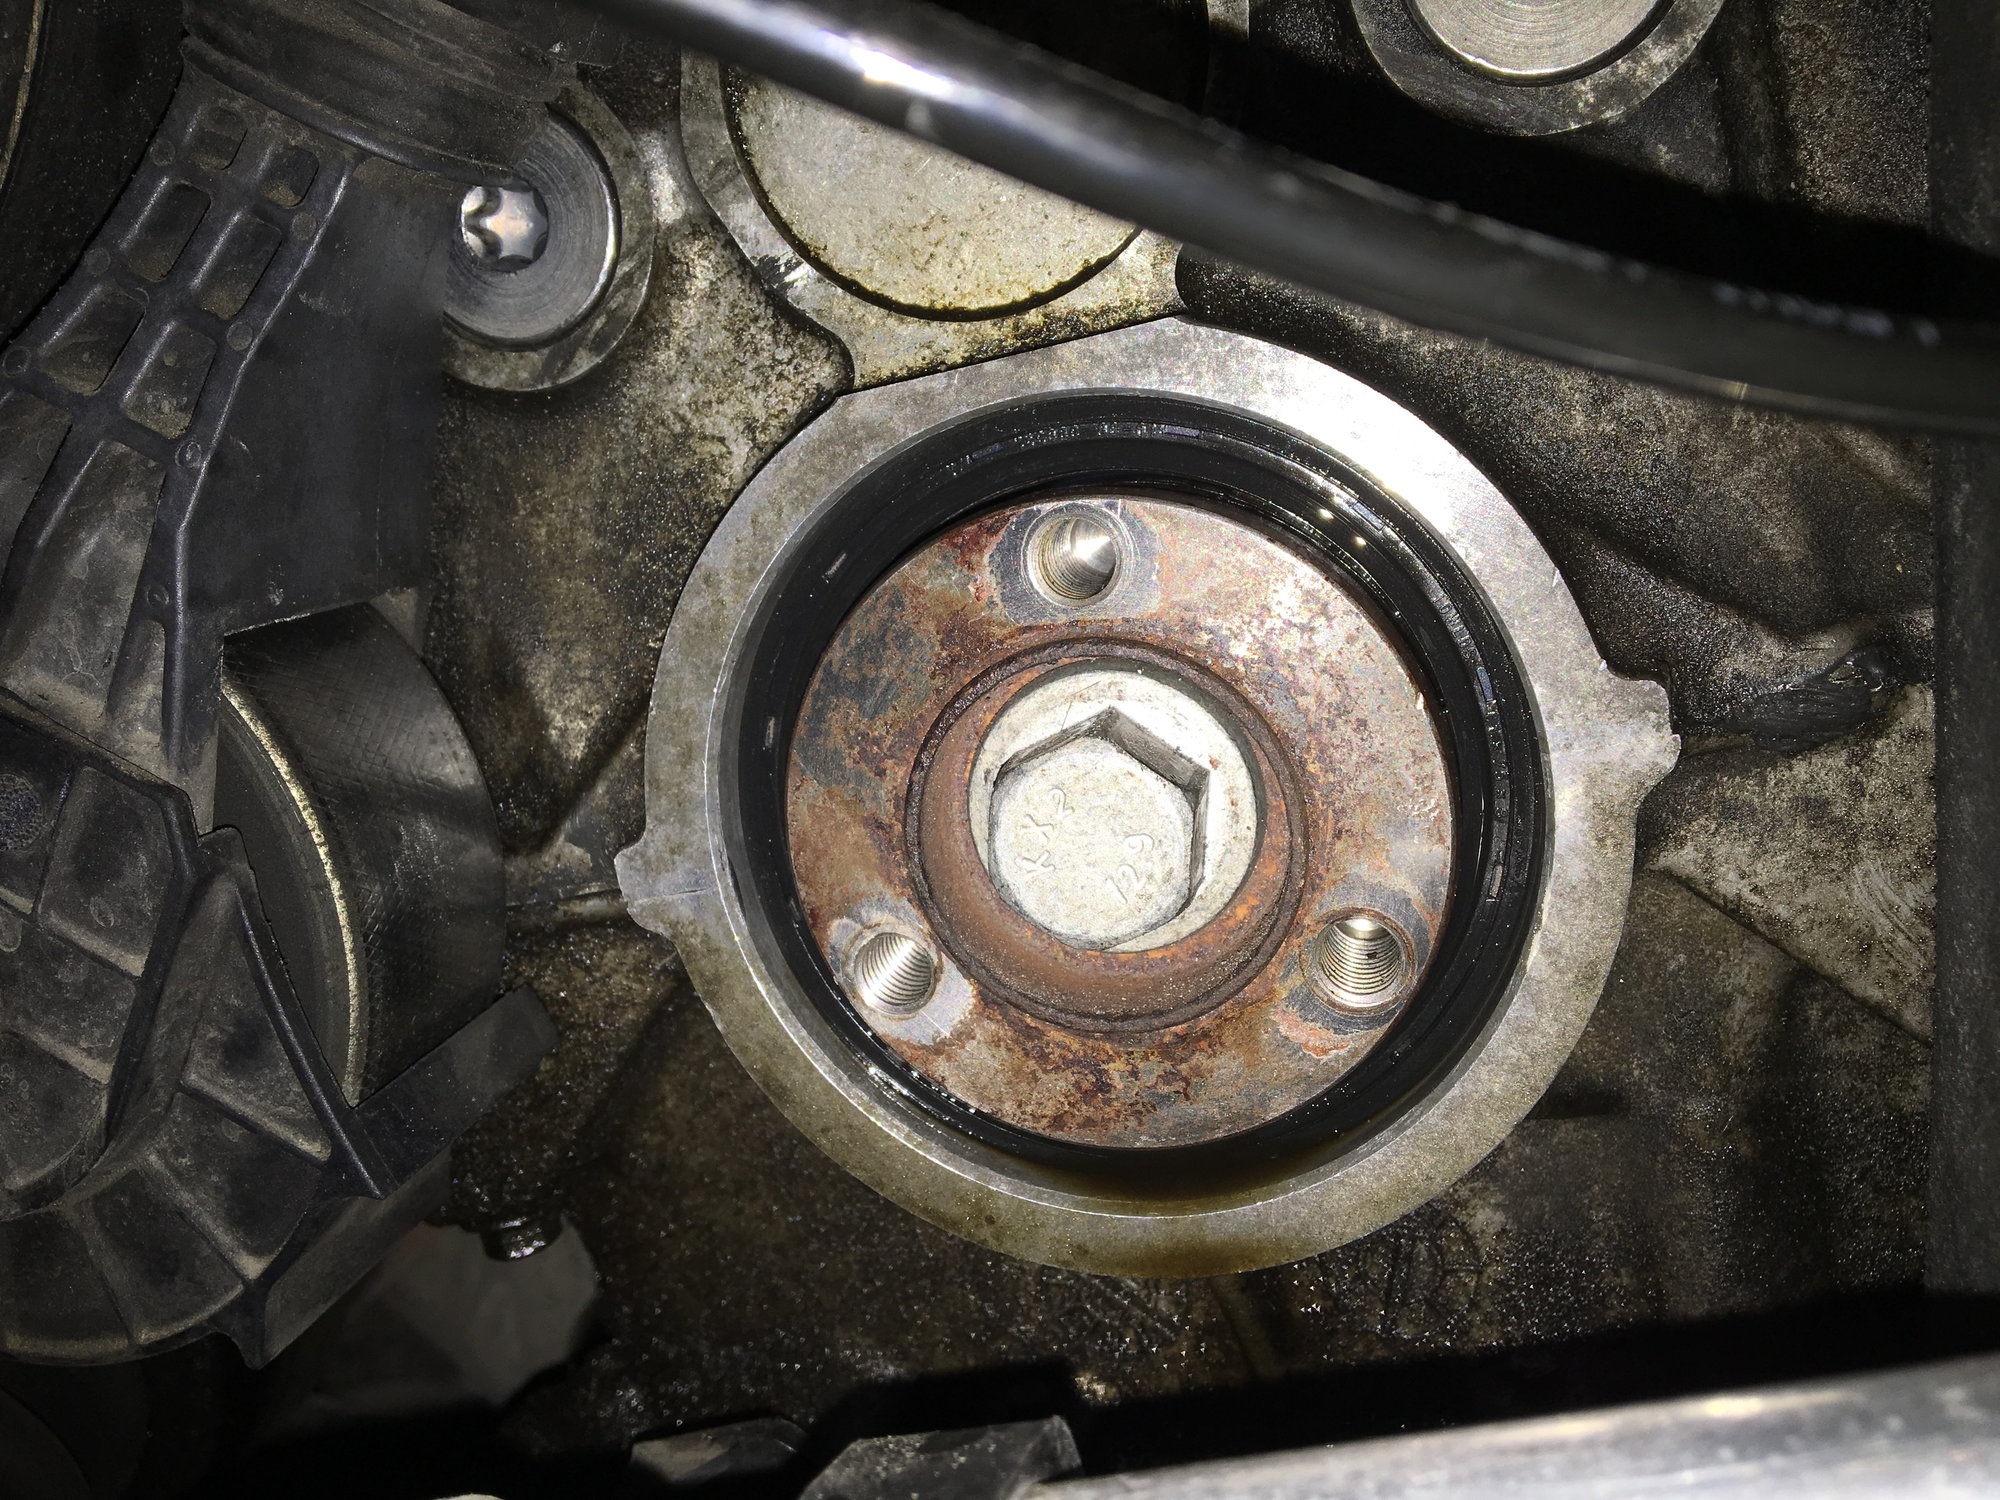 How To R56 Front Crank Seal Replacement Story (First Post) - North